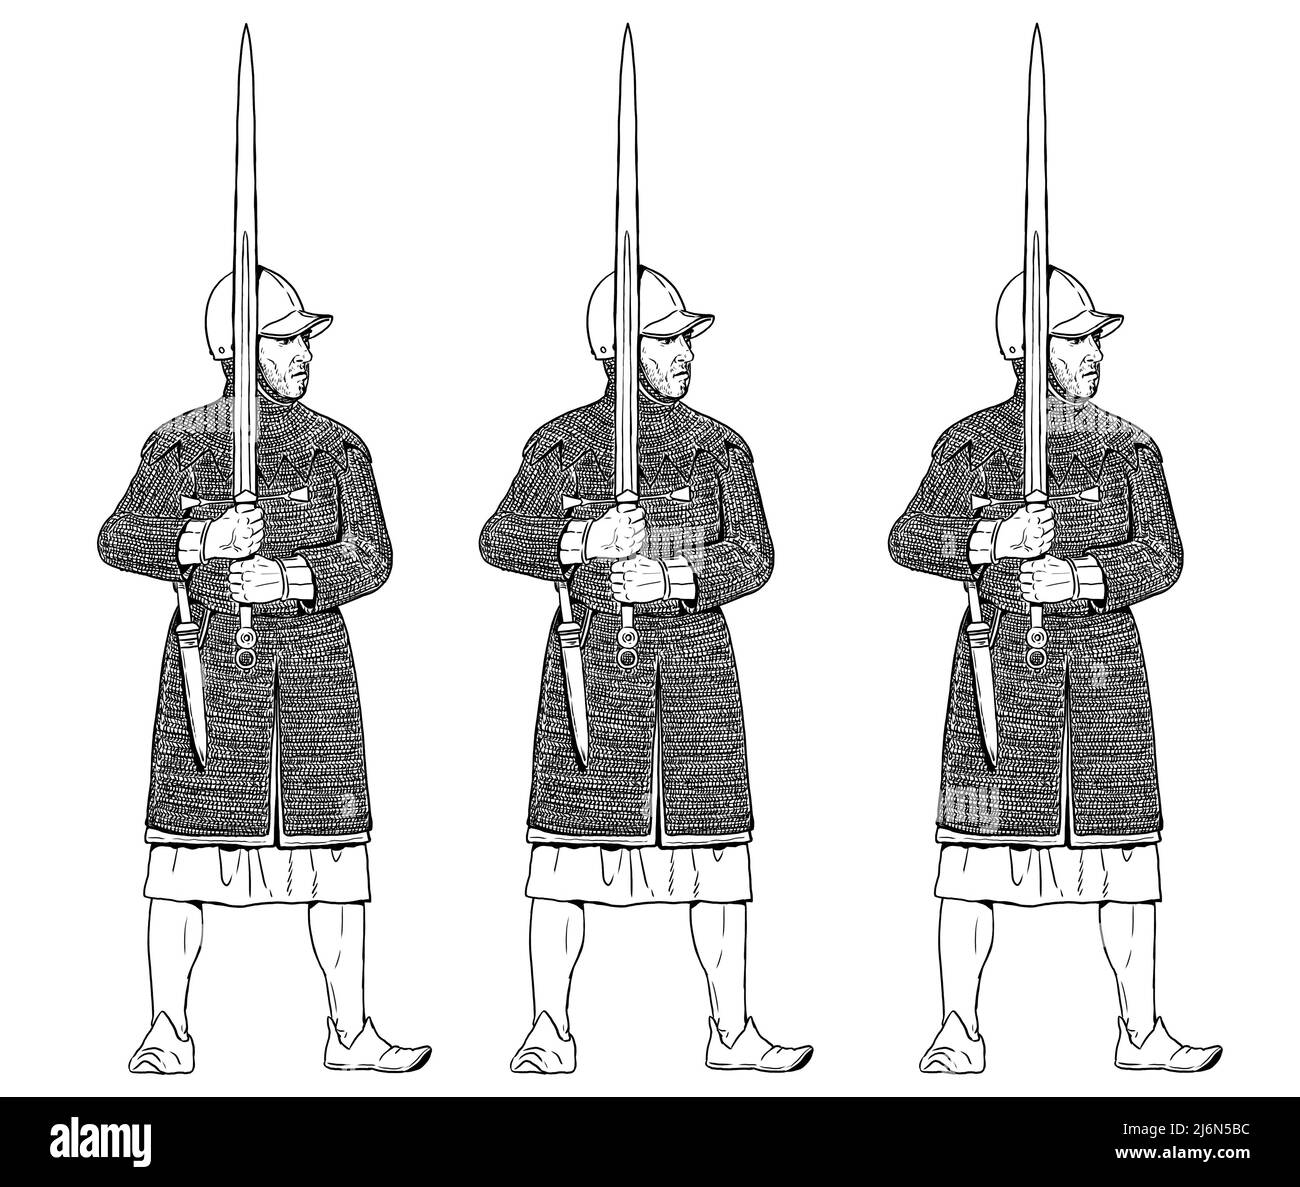 Knight with the long sword. Medieval knight illustration. Stock Photo